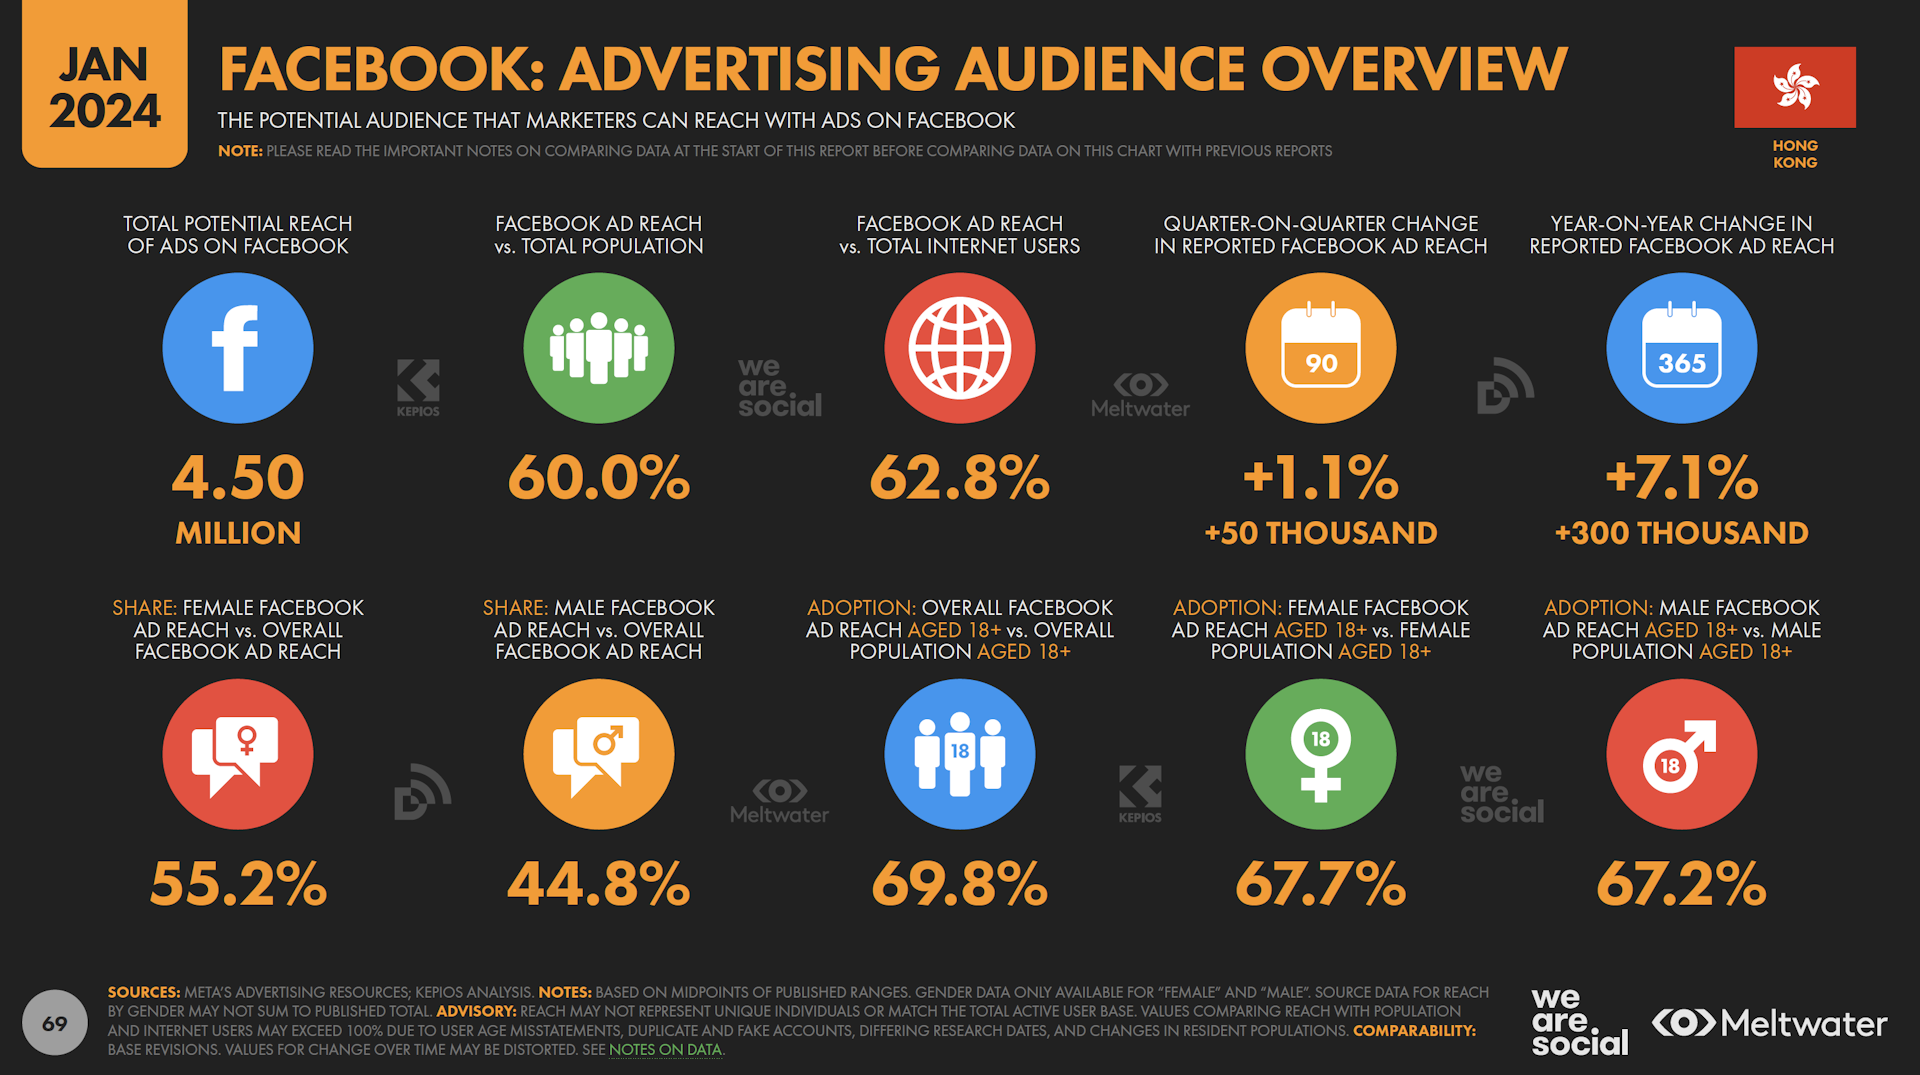 Facebook advertising audience overview based on Global Digital Report 2024 for Hong Kong